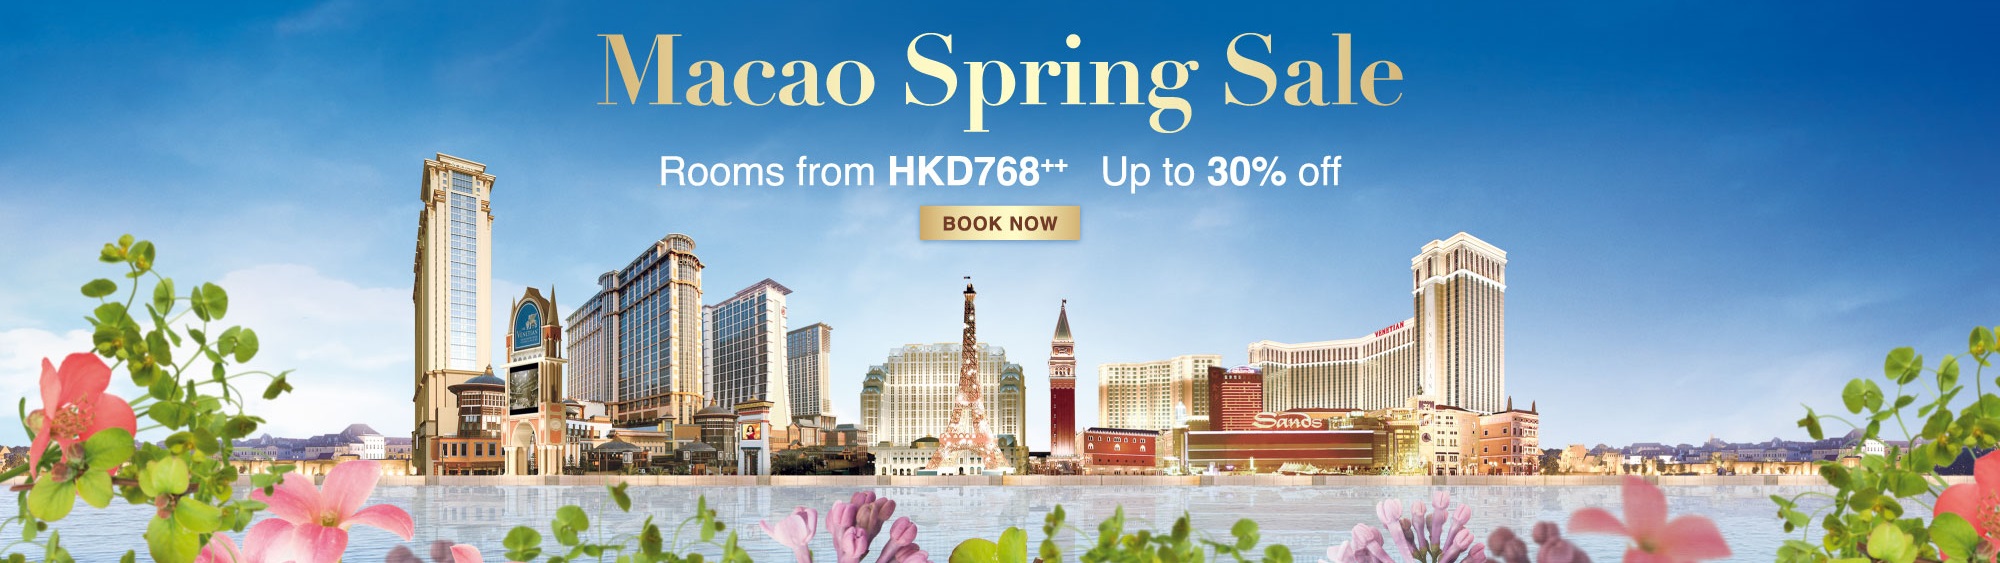 2018 Macao Spring Sale